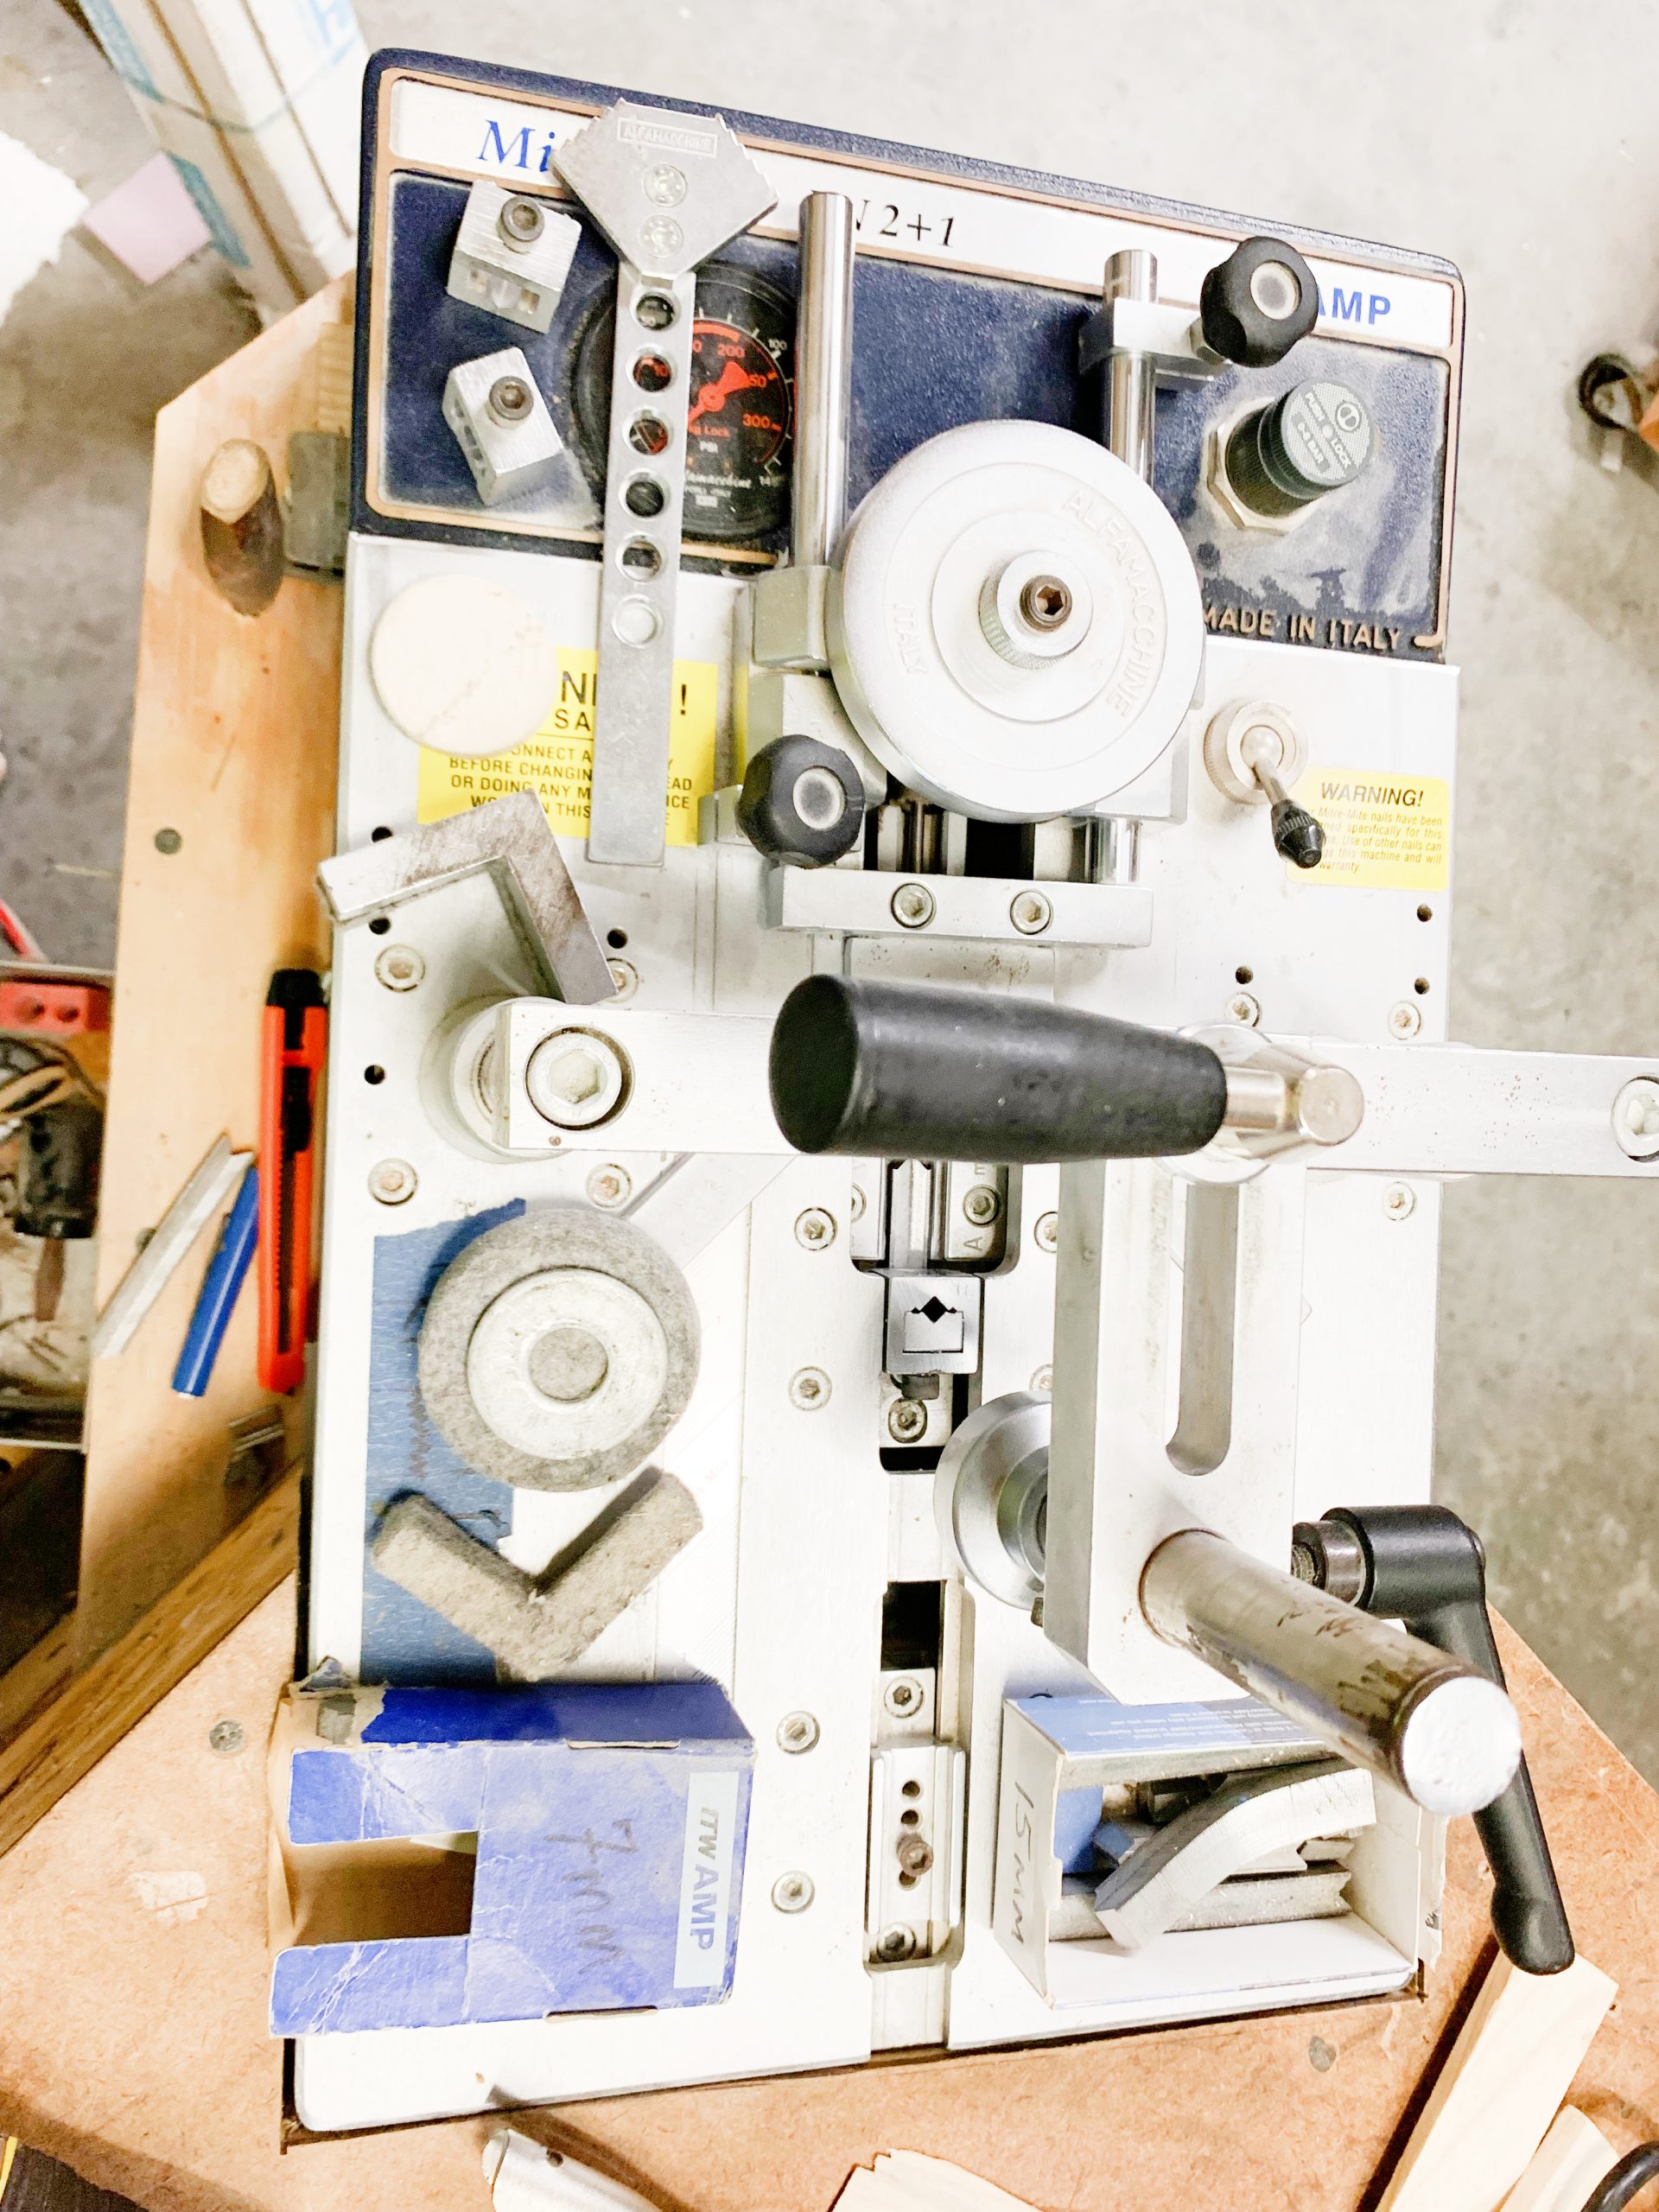 Picture Framing Equipment Lot: Cassese CS999 Double Miter Saw, ITW AMP VN2+1 Vnailer & Vertical Moulding Racks (Used) Item # UE-041922A (Louisiana)